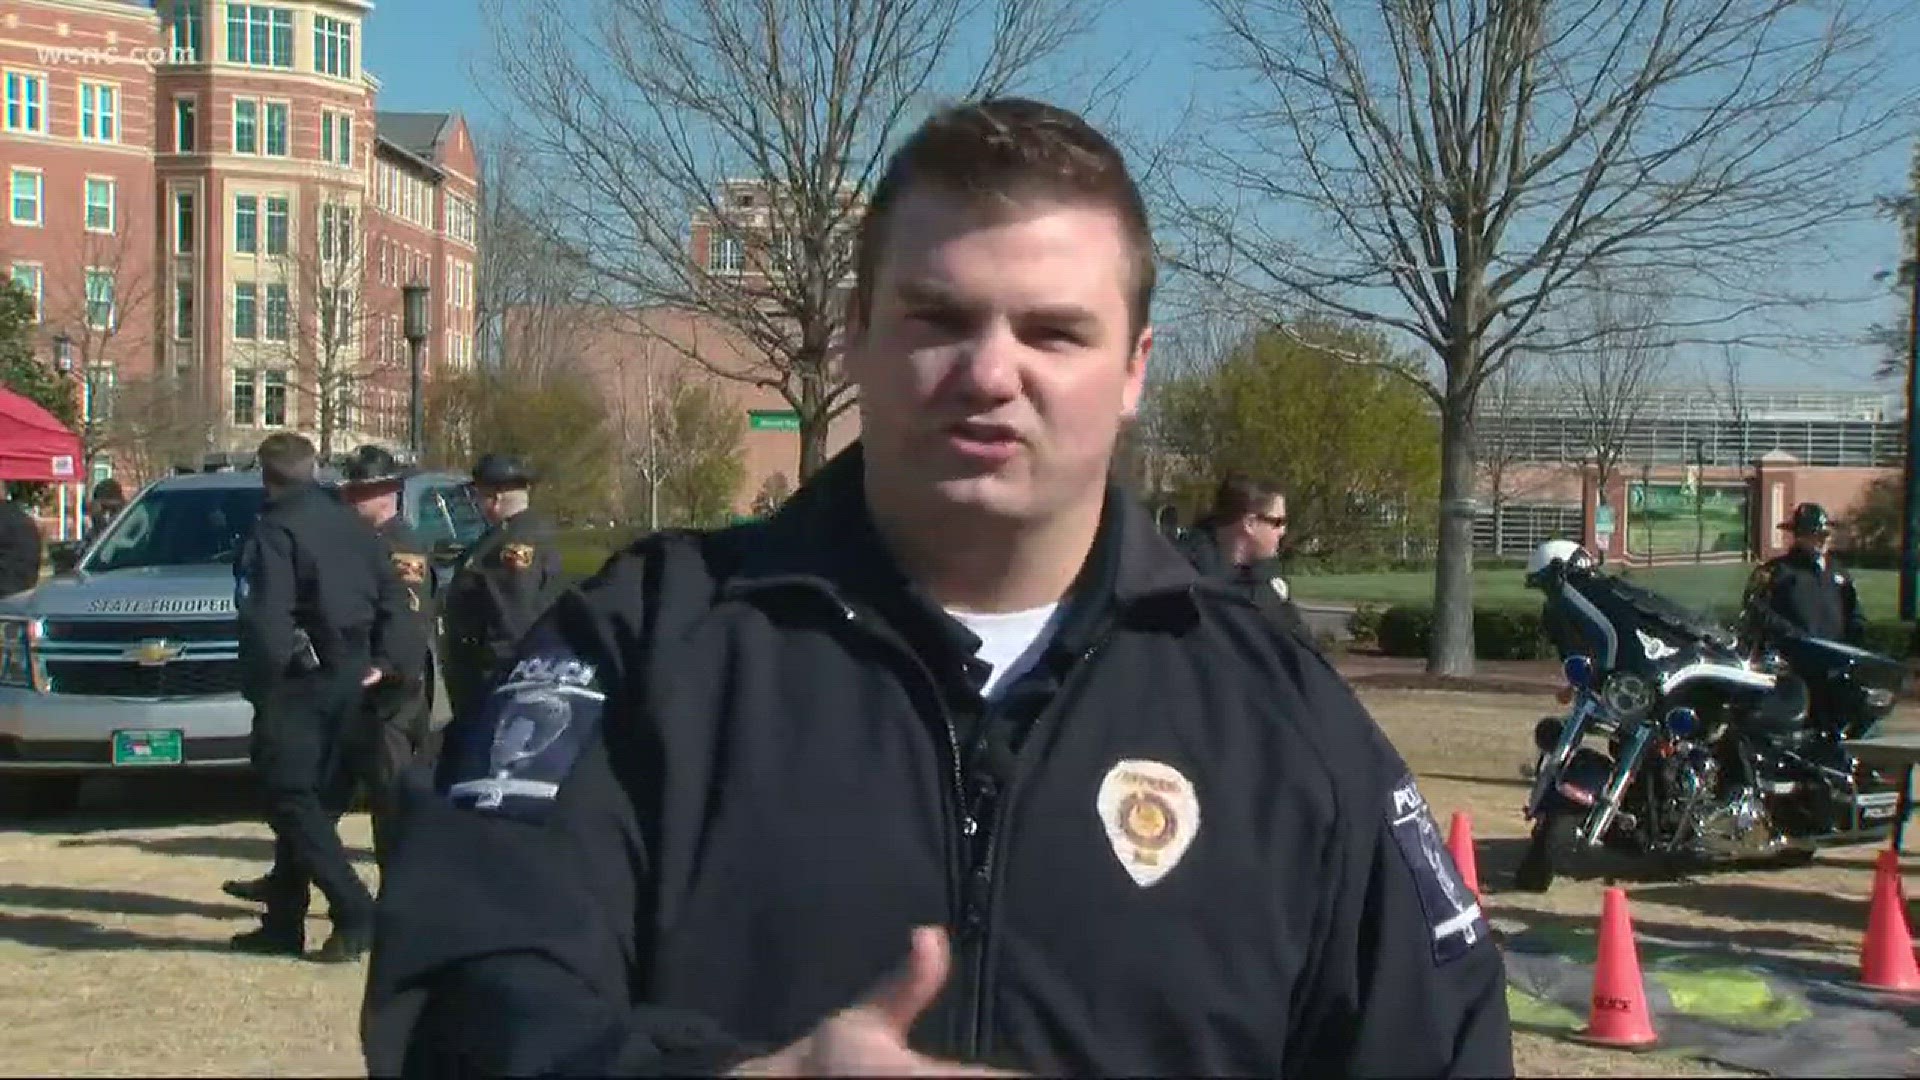 CMPD also hosted a 'booze it' or 'lose it' event at UNC Charlotte